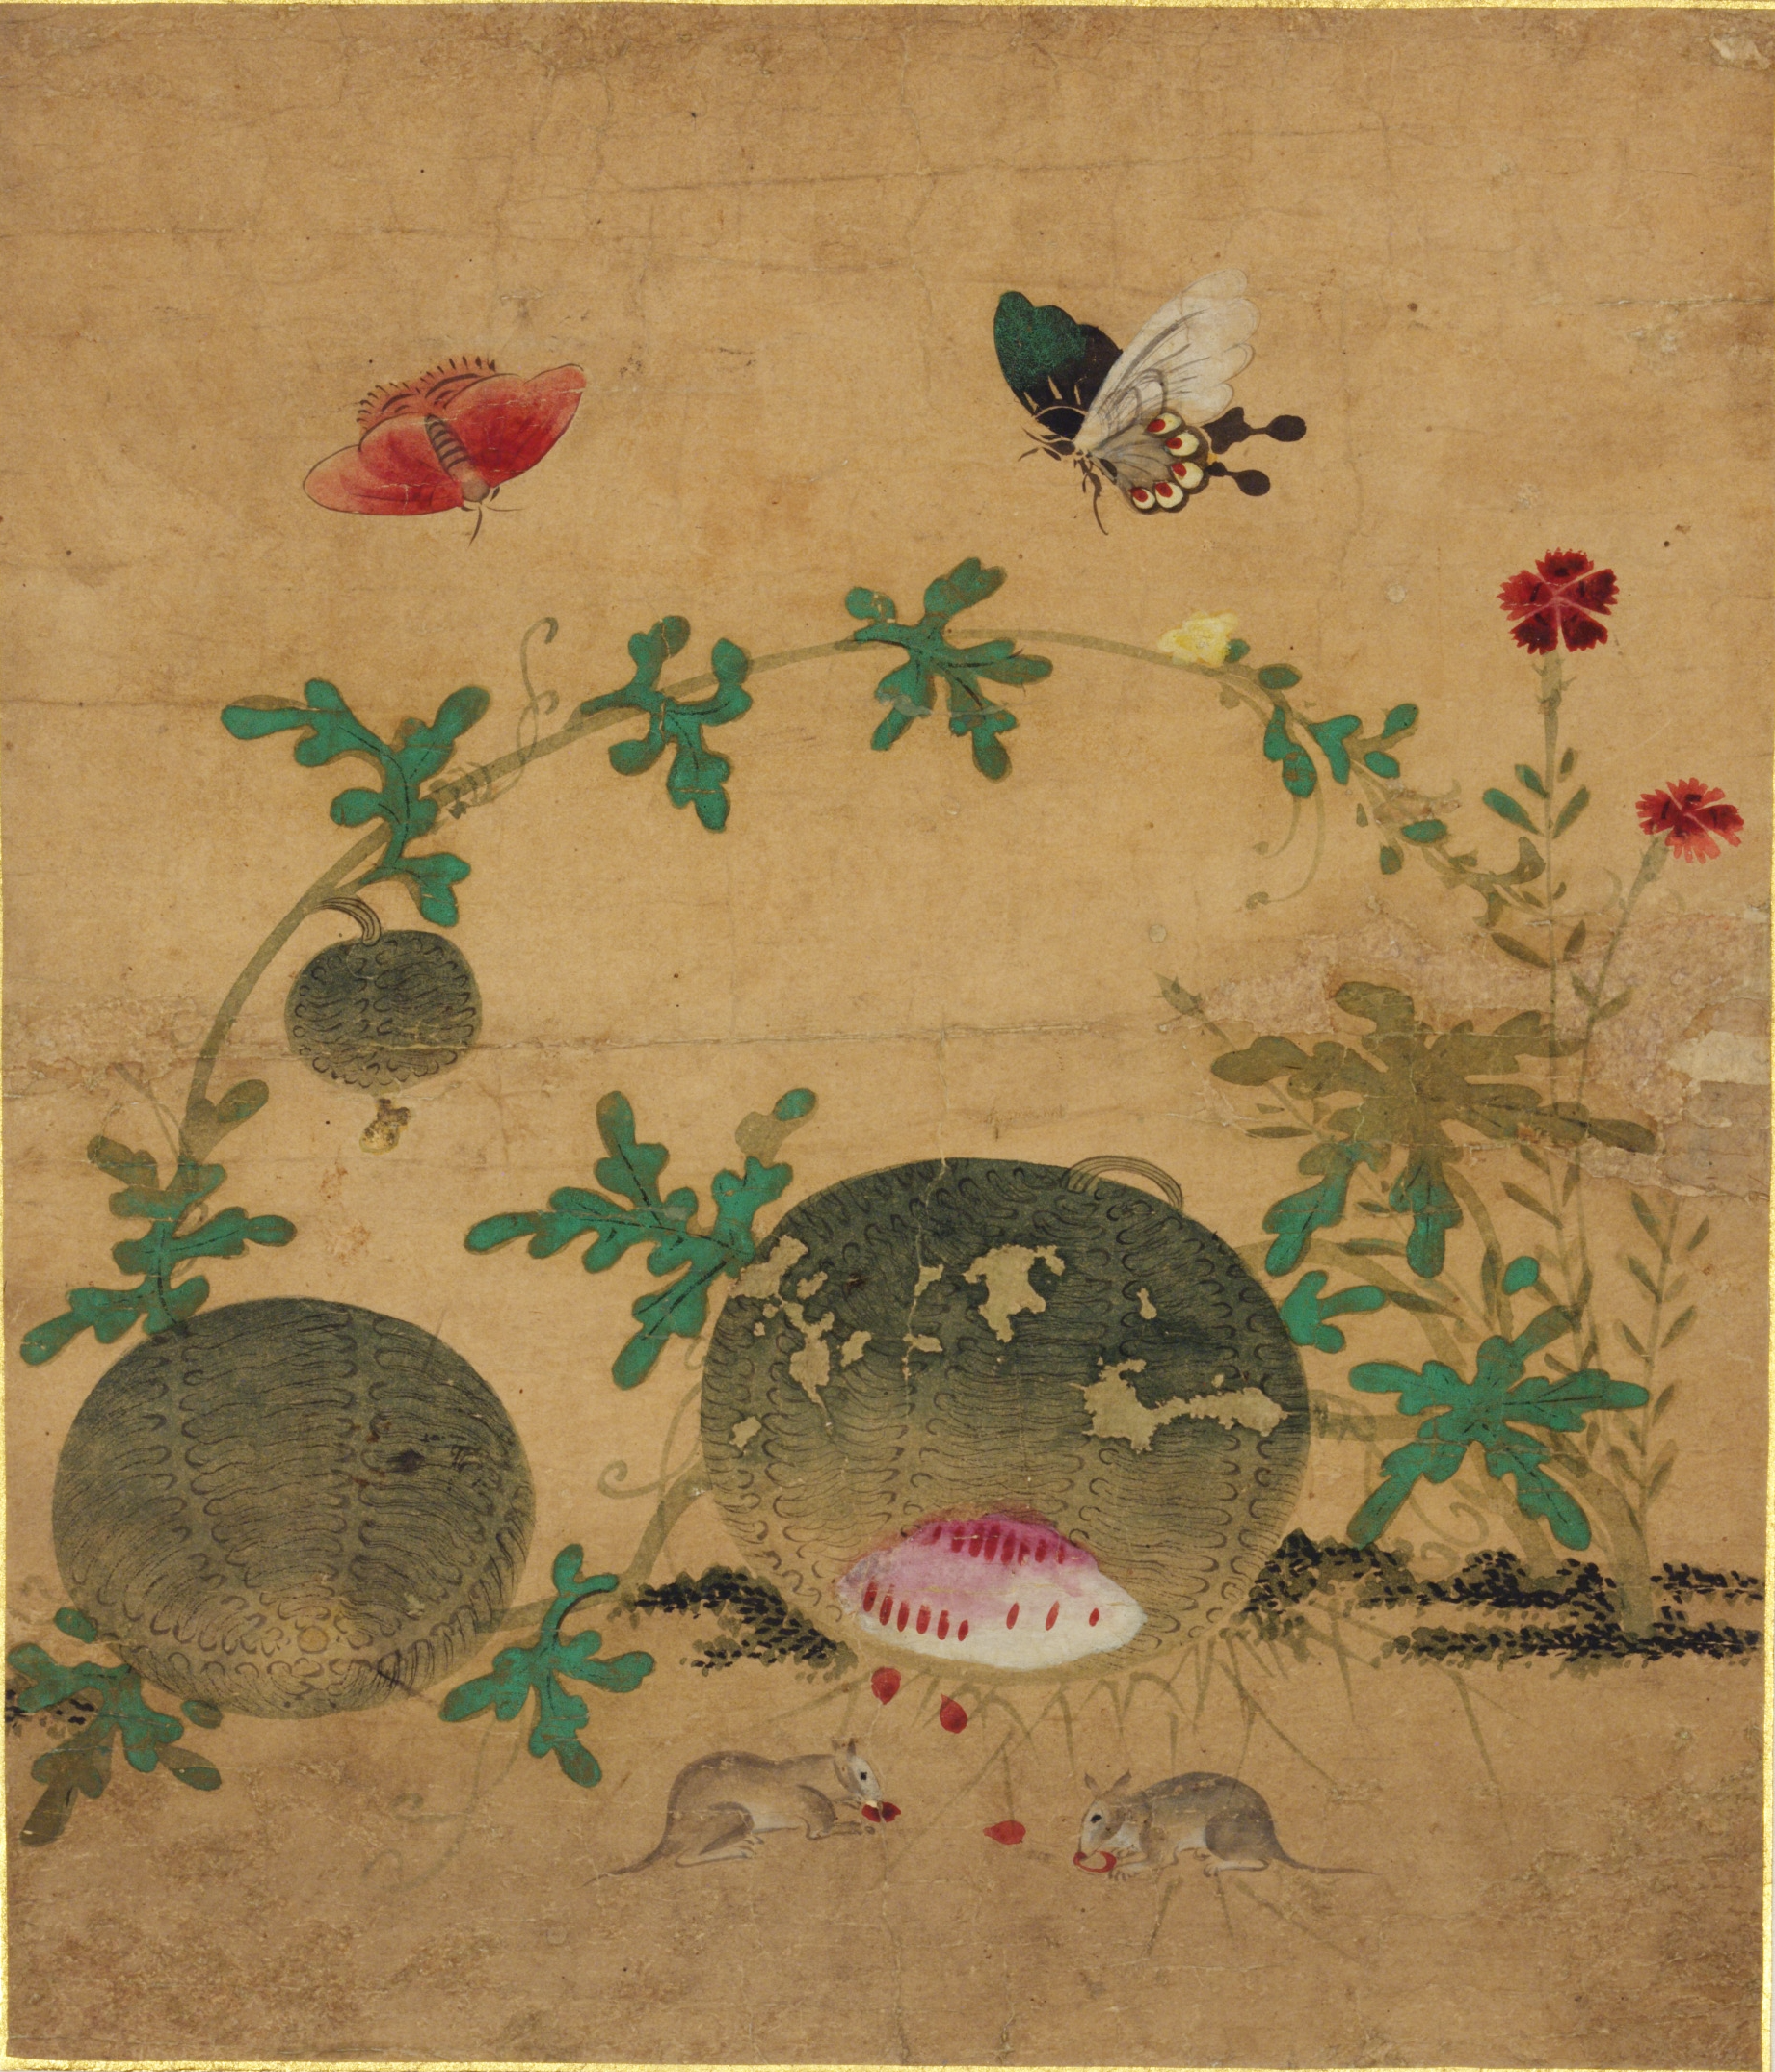 Painting of Mice Nibbling on a Watermelon by Shin Saimdang - 16th century - 32.8 x 28 cm National Museum of Korea